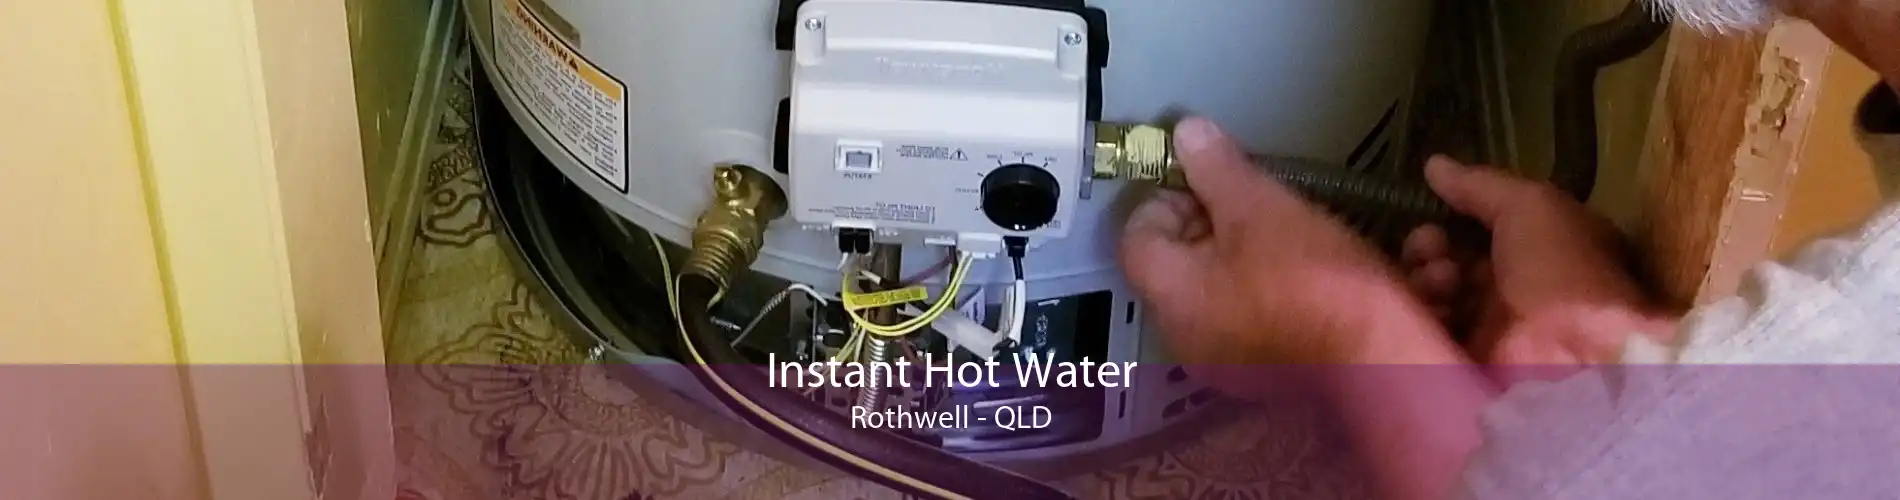 Instant Hot Water Rothwell - QLD